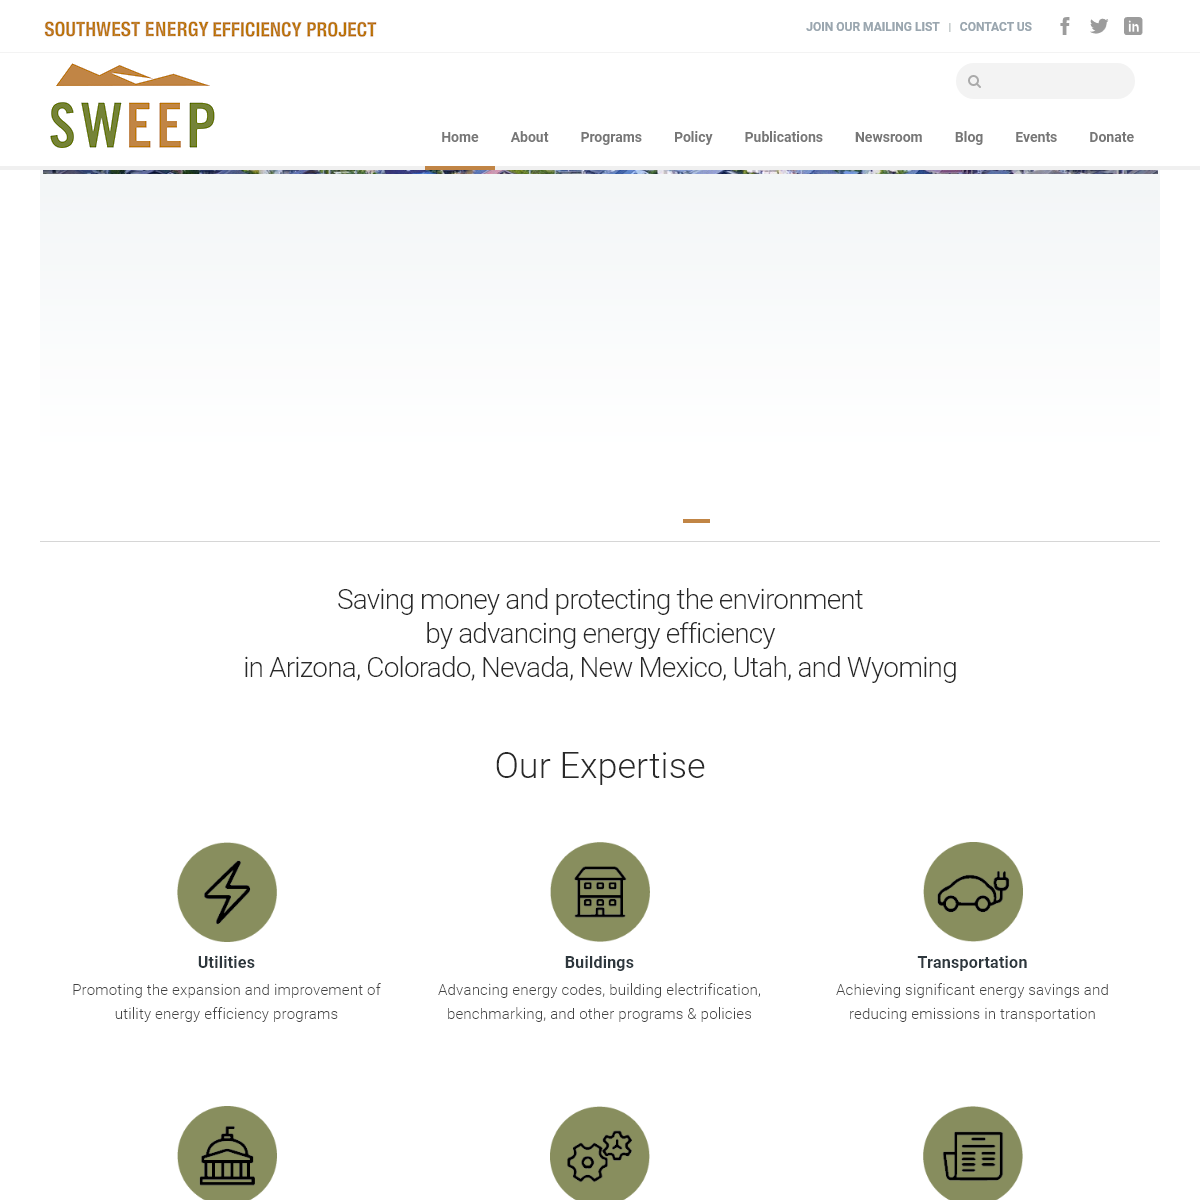 A complete backup of swenergy.org